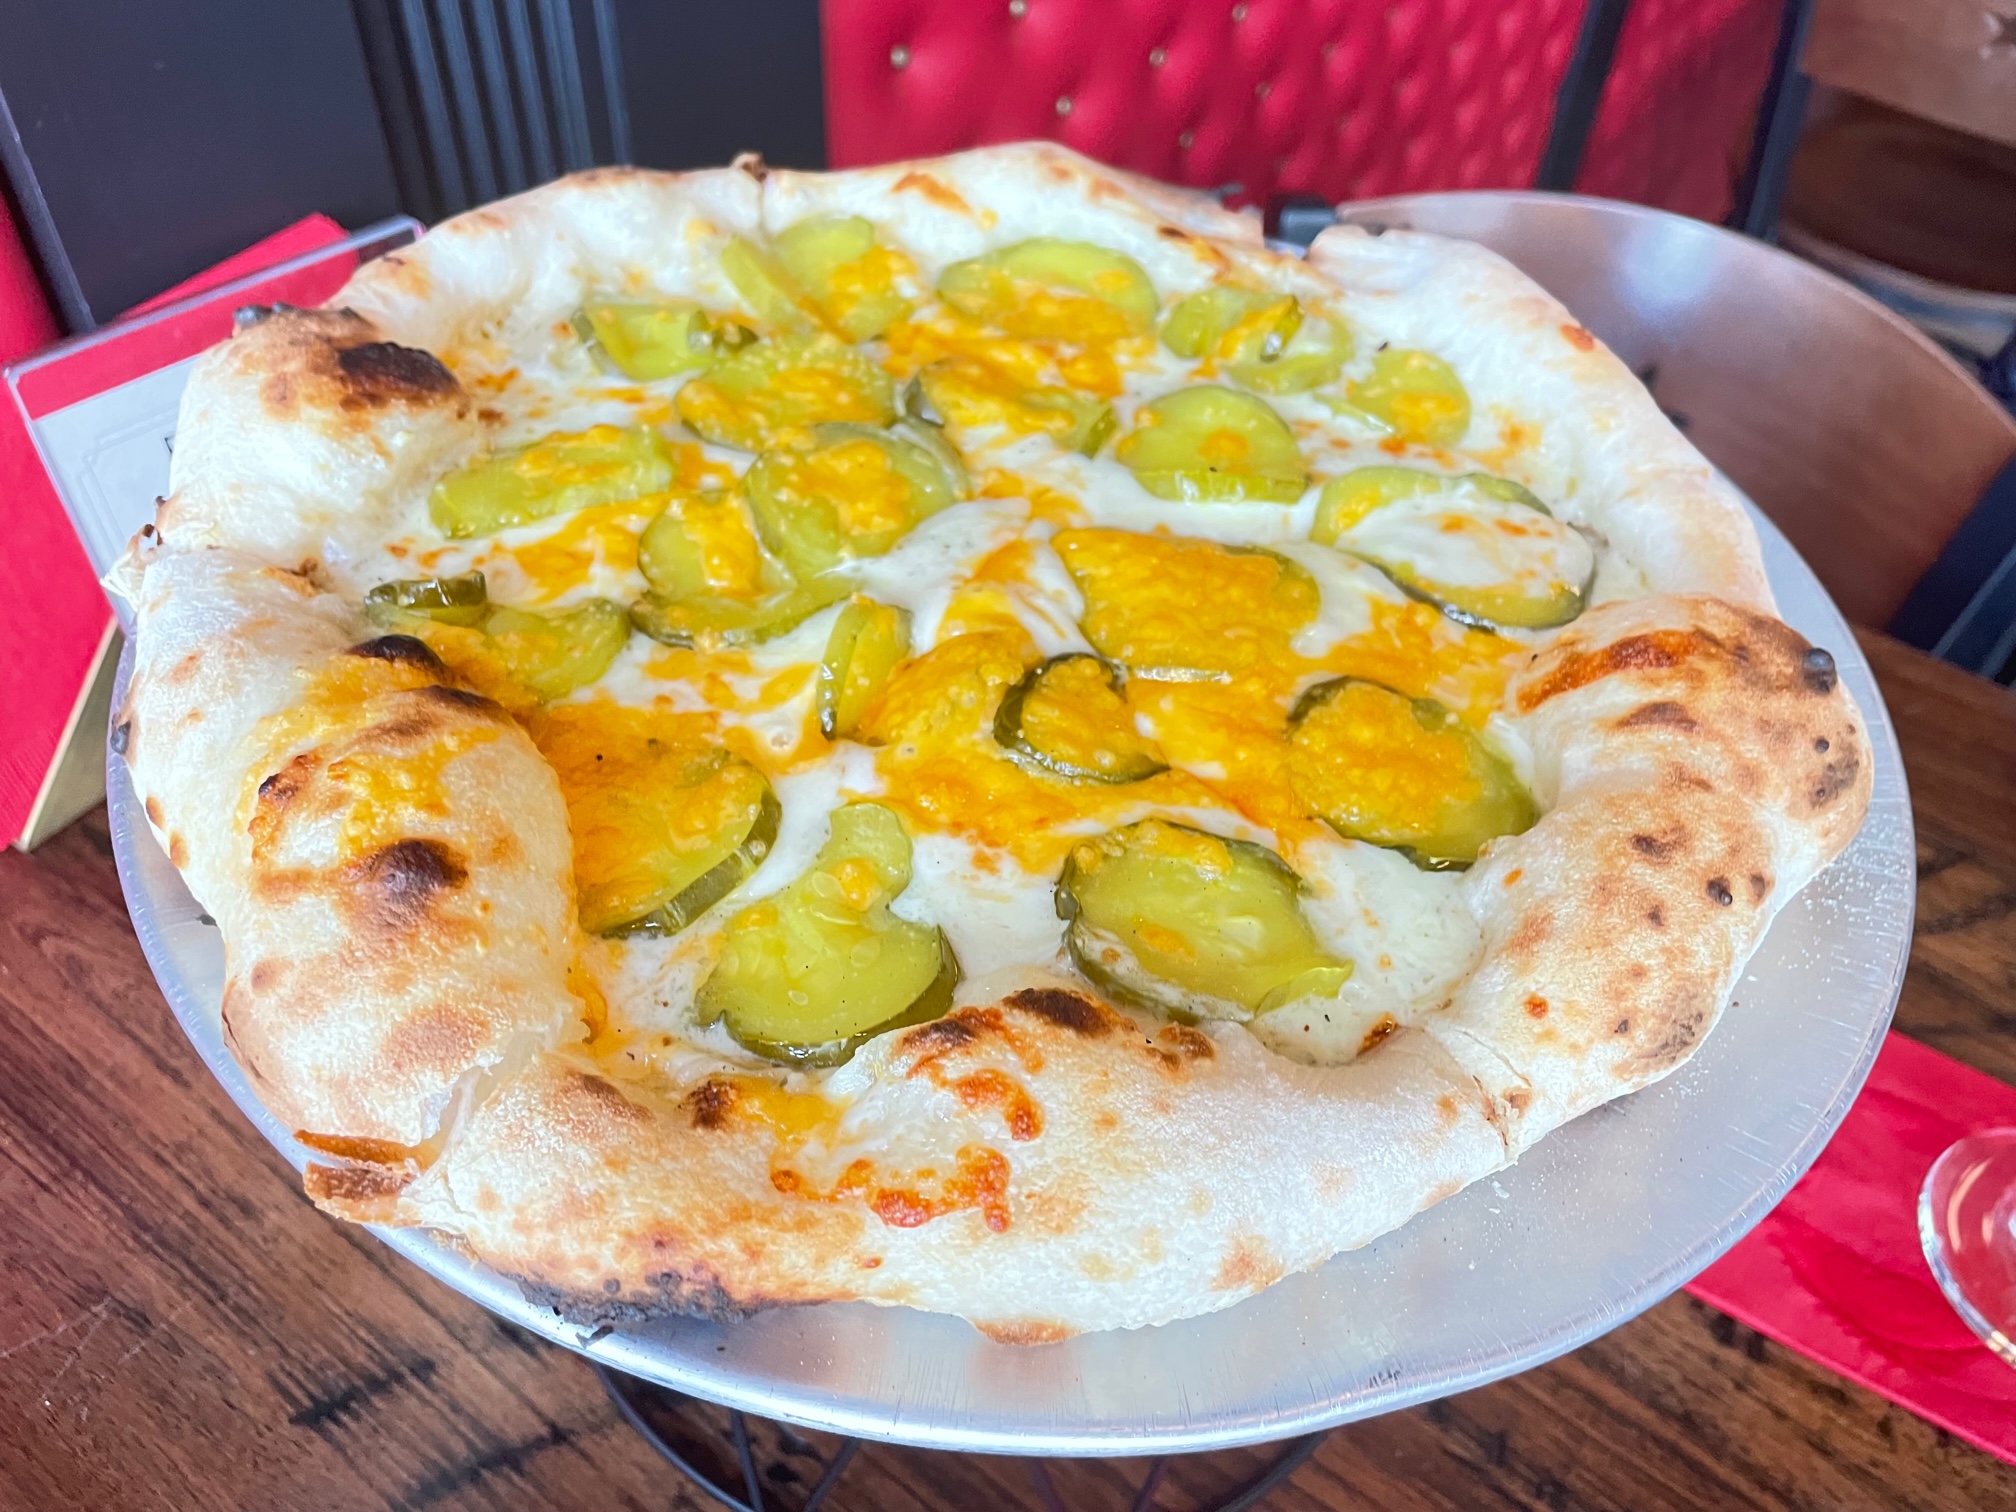 South of Shaw Beer Co's Pickle Pizza